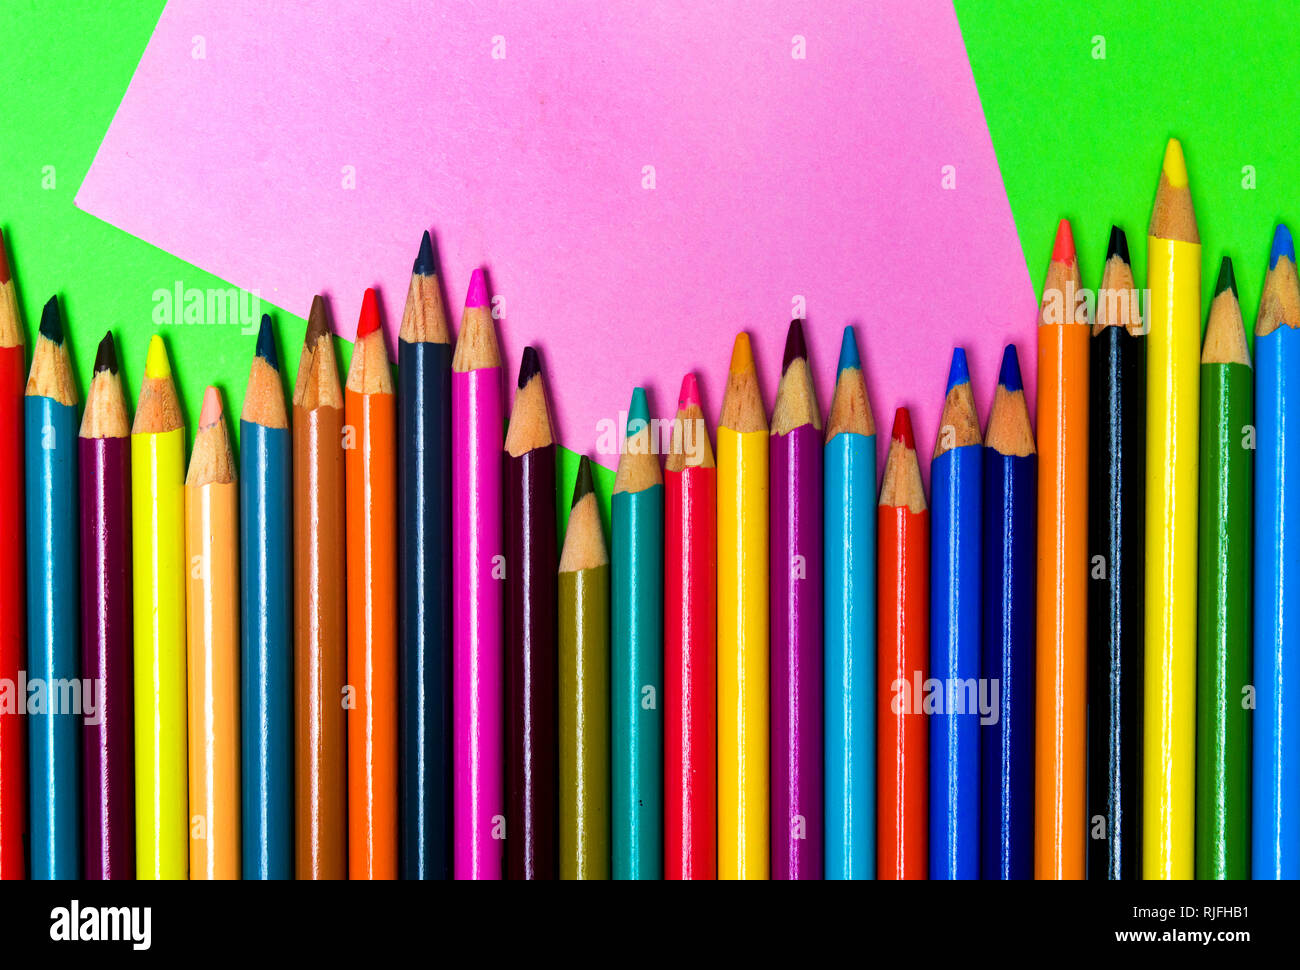 Colorful pencils on creative abstract background row Stock Photo